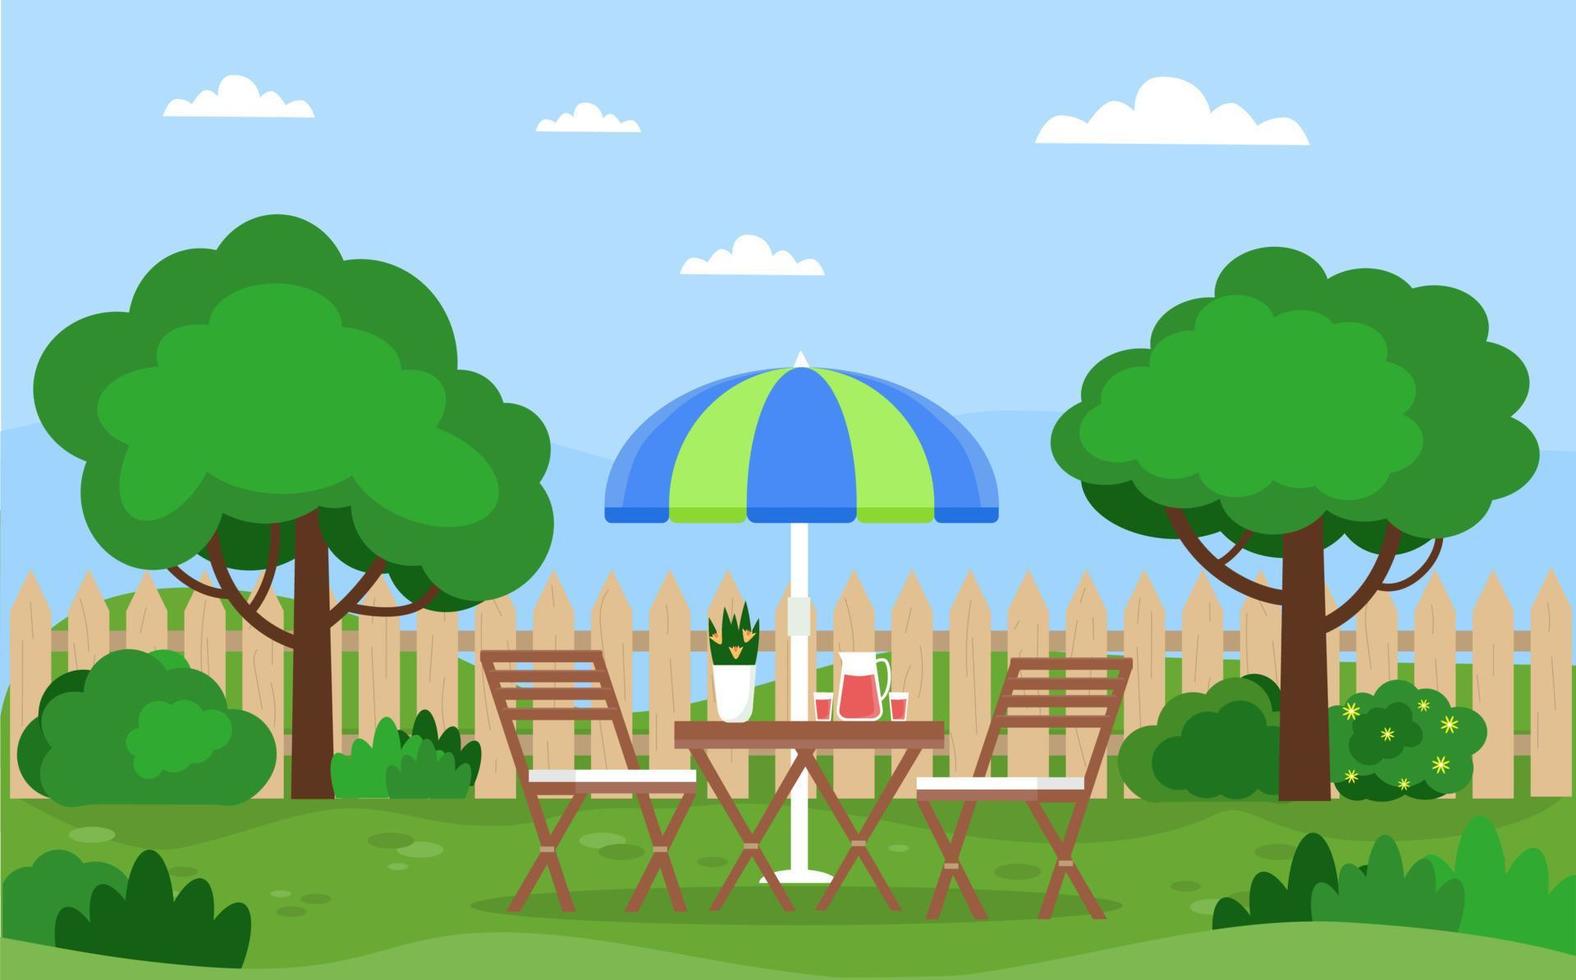 House backyard with relax zone, trees, bushes, lawn, flowers. Vector illustration in flat style.